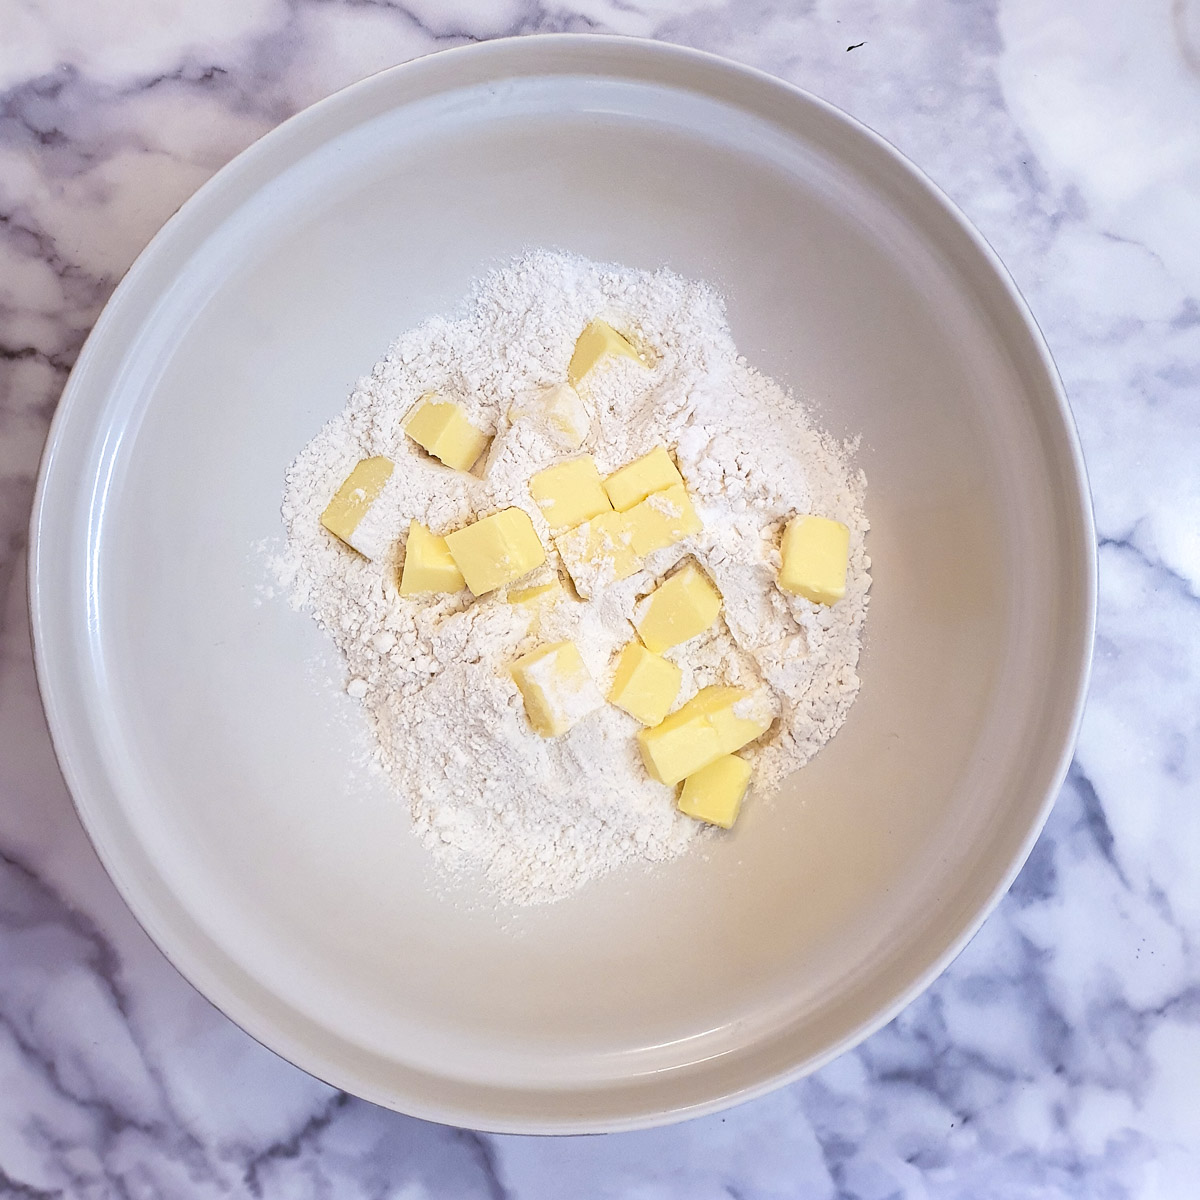 Cubed butter and flour in a large white mixing bowl.